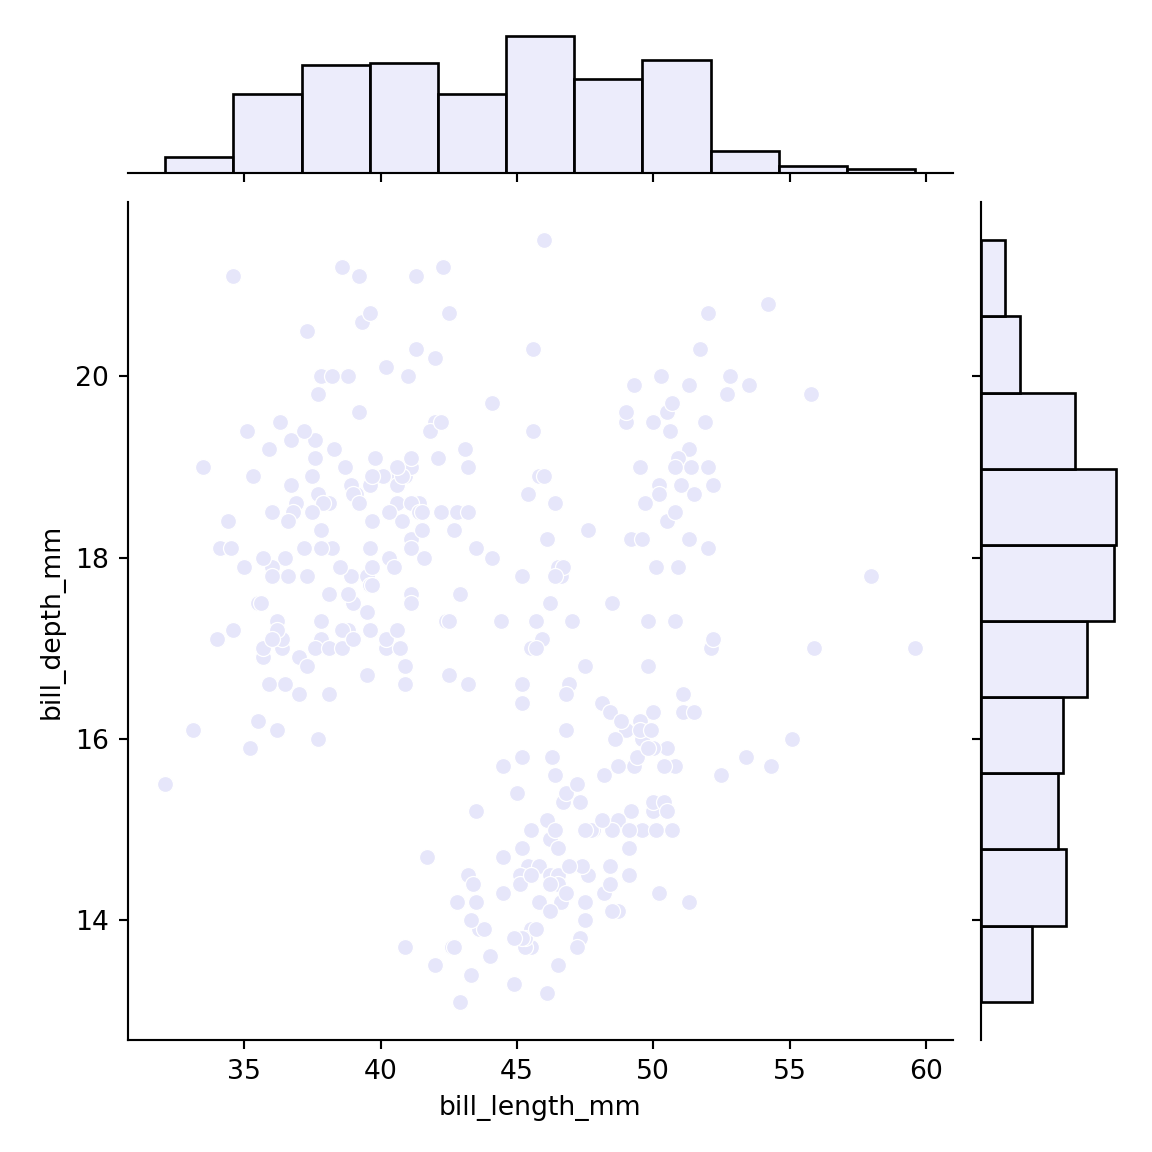 Color customization of a joint plot in seaborn